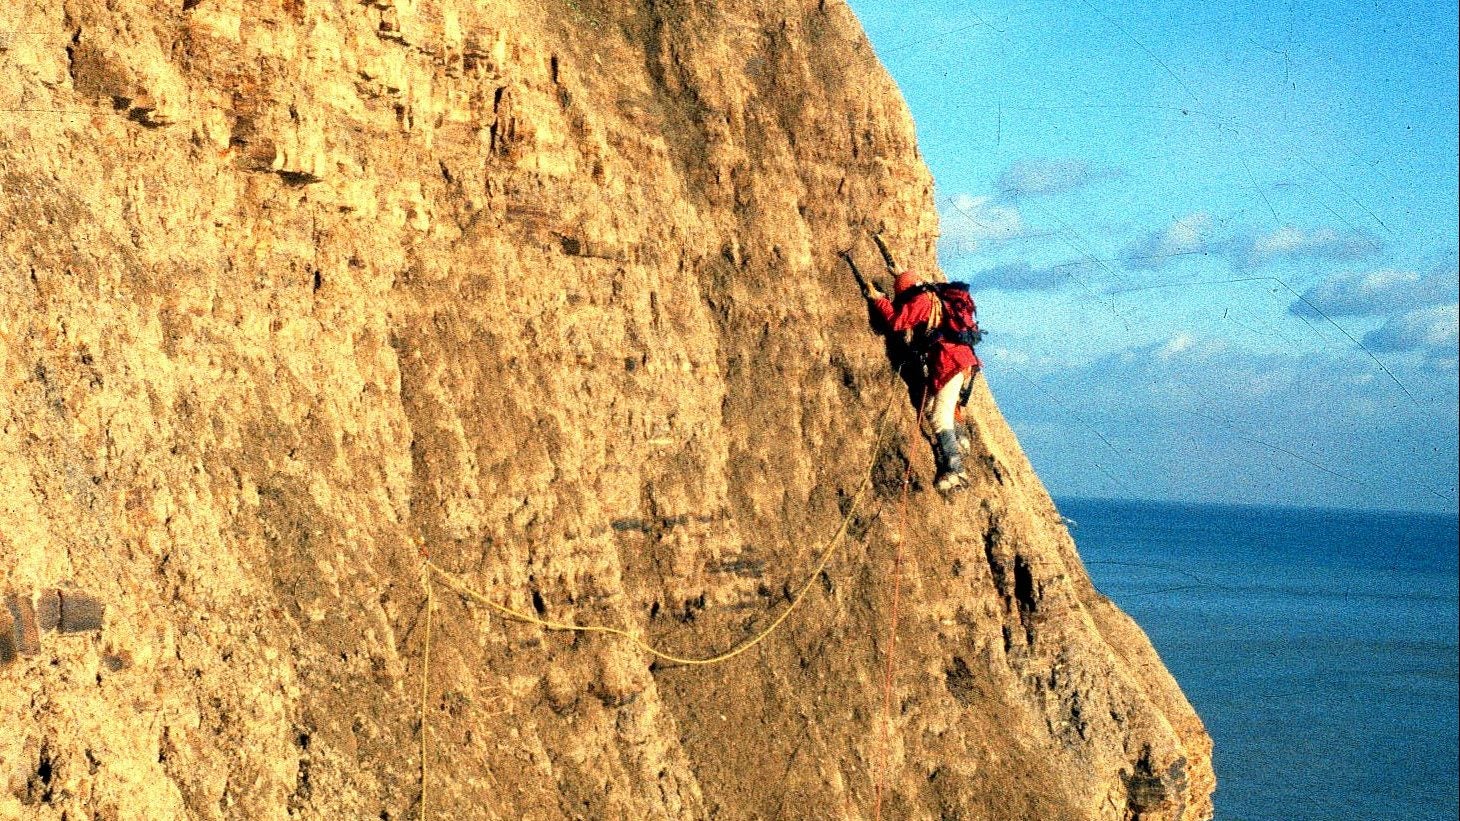 Reasons to be Fearful, a rock climbing essay from Victor Saunders' book  Structured Chaos - Climbing